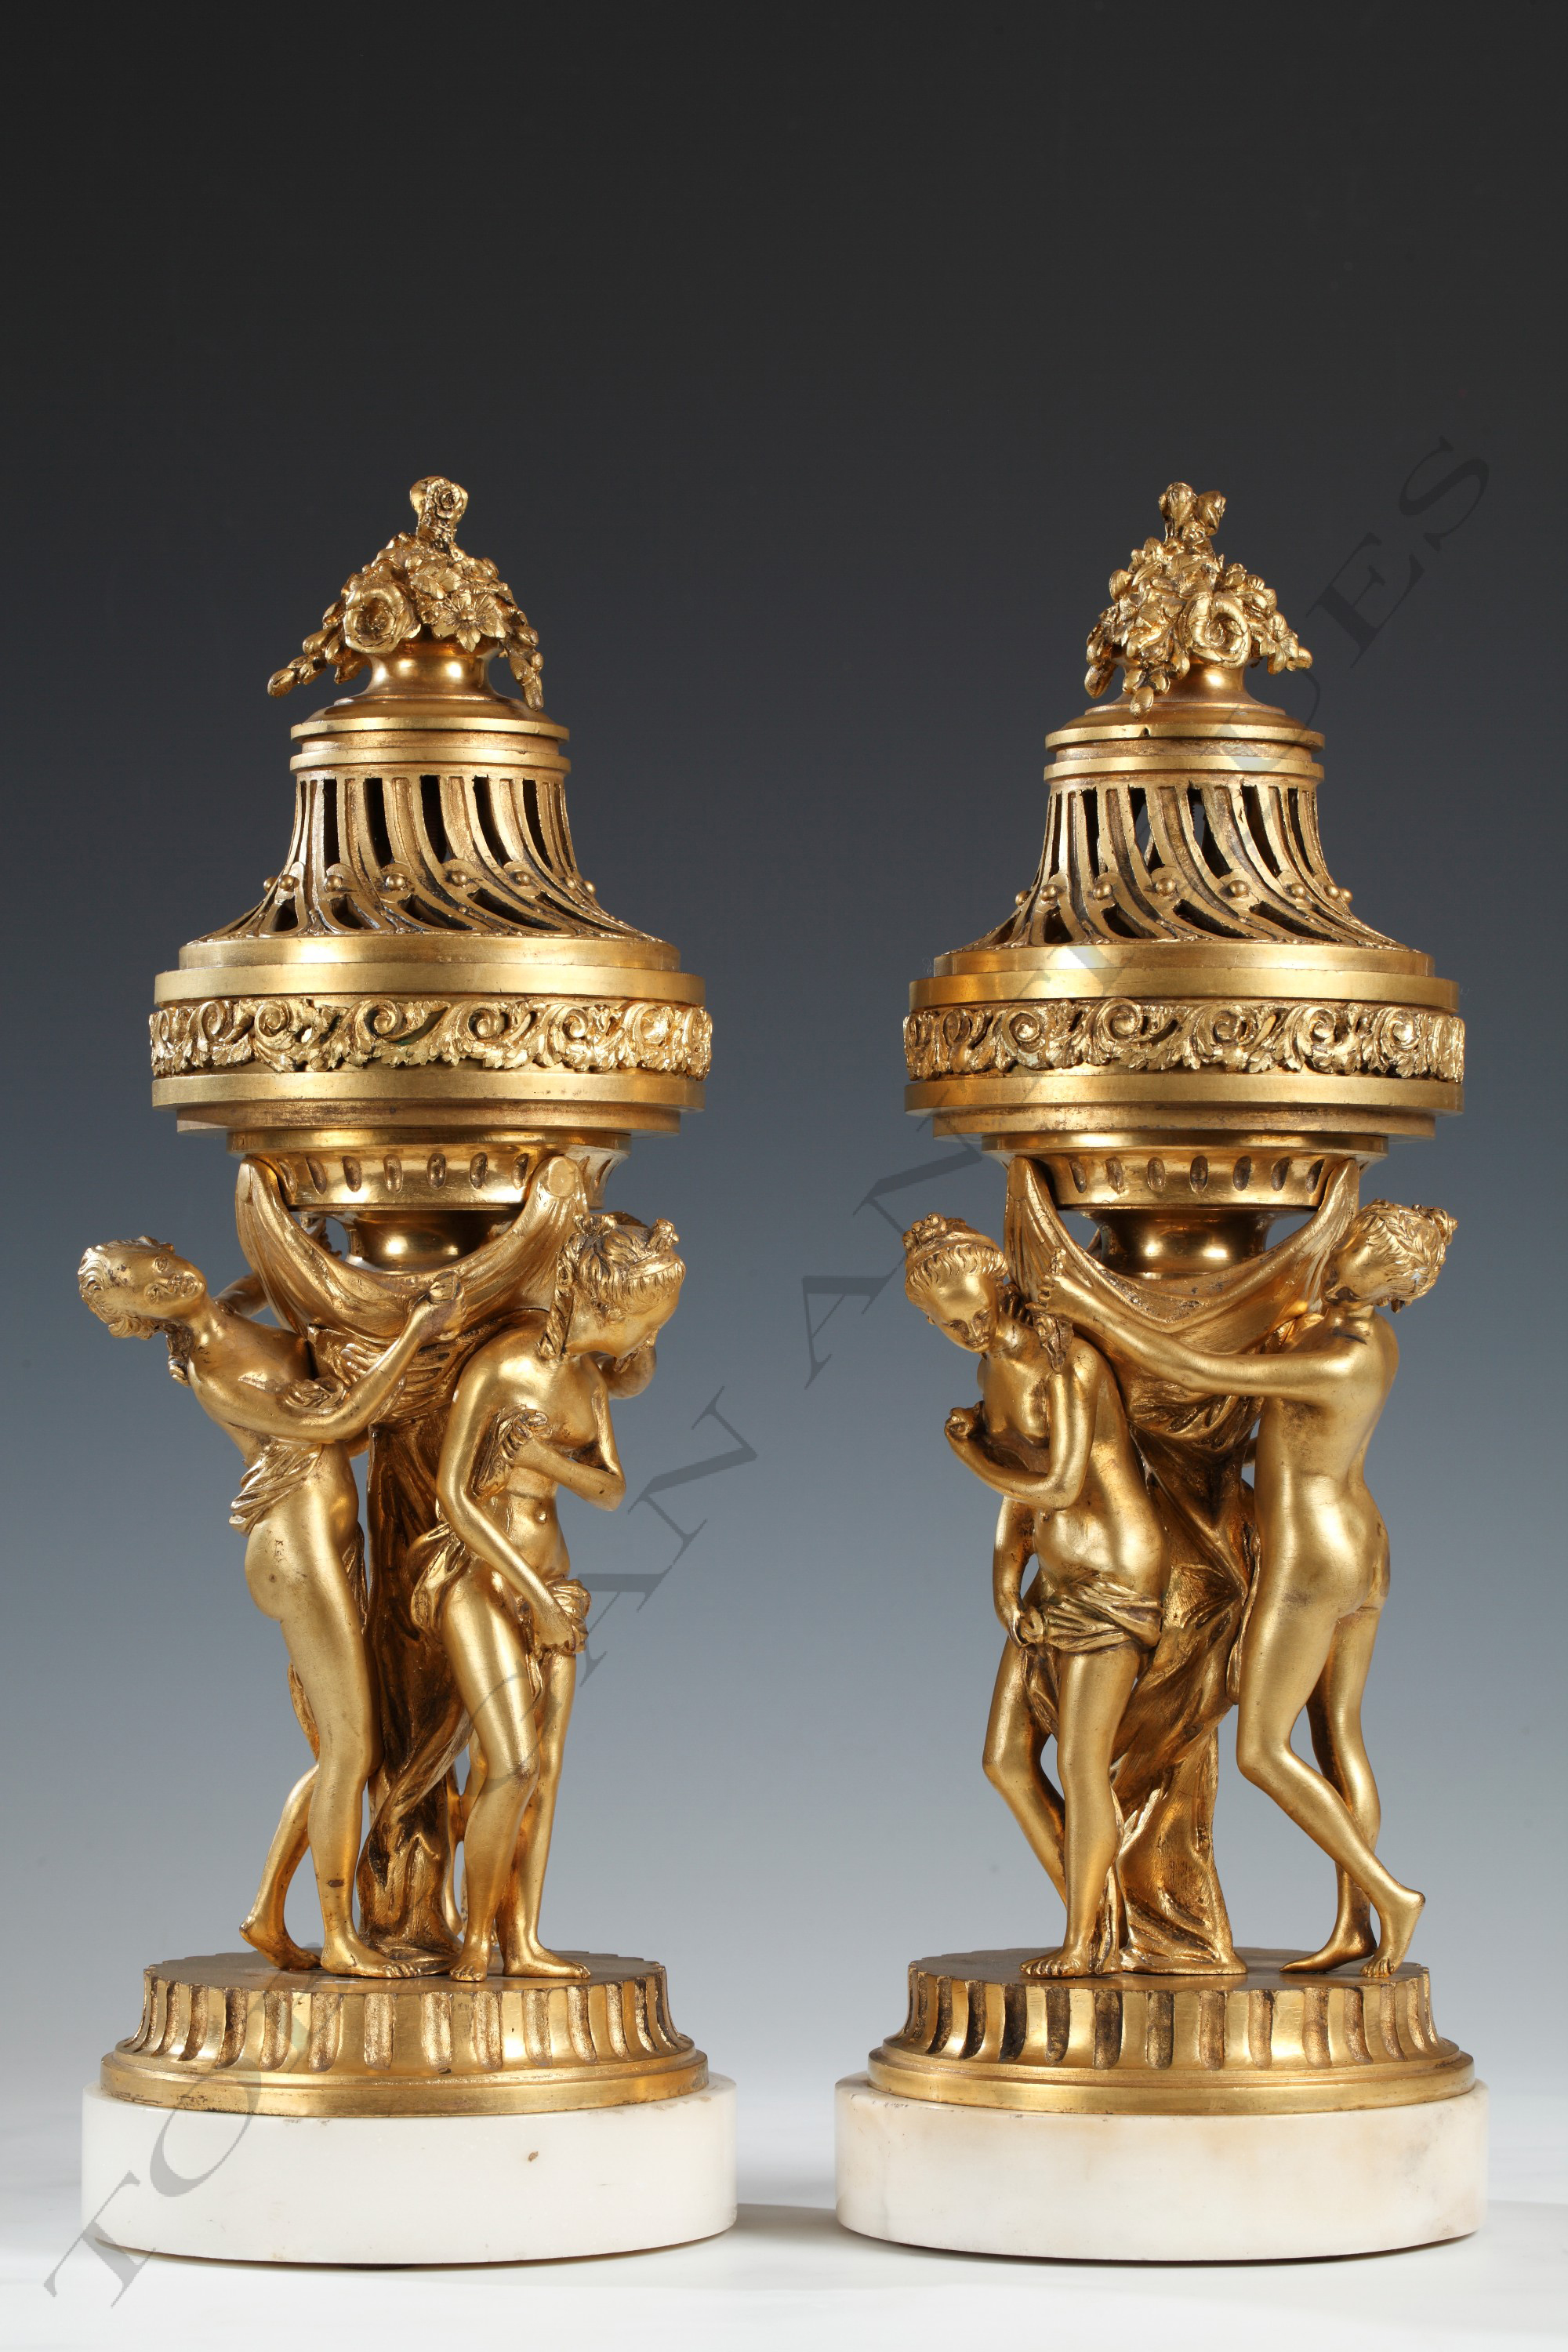 Pair of Perfume Burners “with Three Graces”